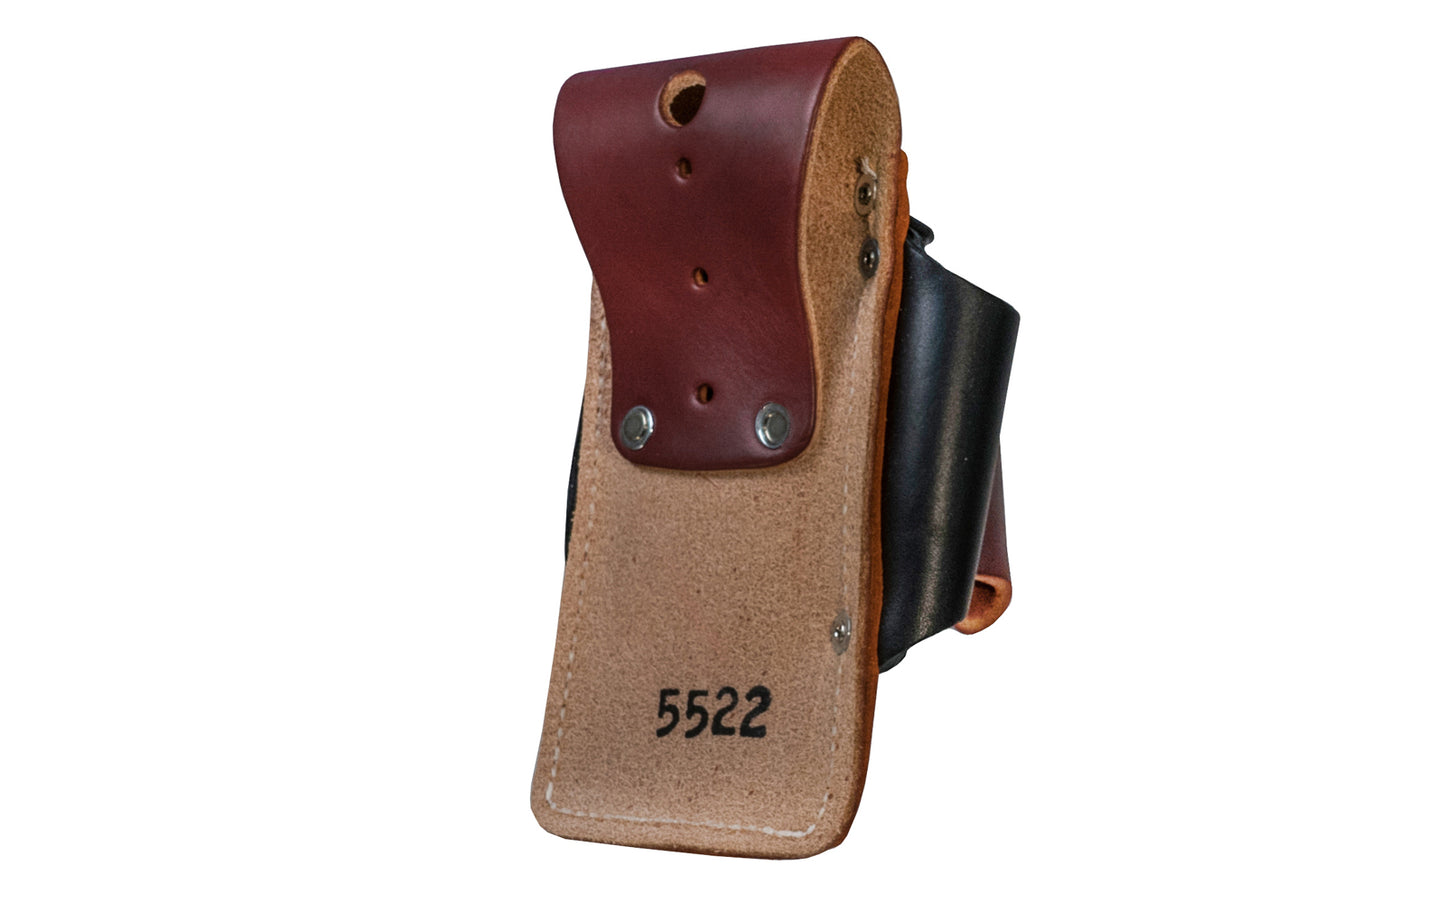 Made in USA - Occidental Leather 4-in-1 holder provides 4x the tool capacity in the space of one holder. Holders for tape, lumber crayon or screw driver, pencil - Riveted - Hammer Holster - Hand Made - 759244305807 - 4-in-1 Tool Holder Holster - Model 5522 - Fits up to a 3" work belt - Made of sturdy genuine leather